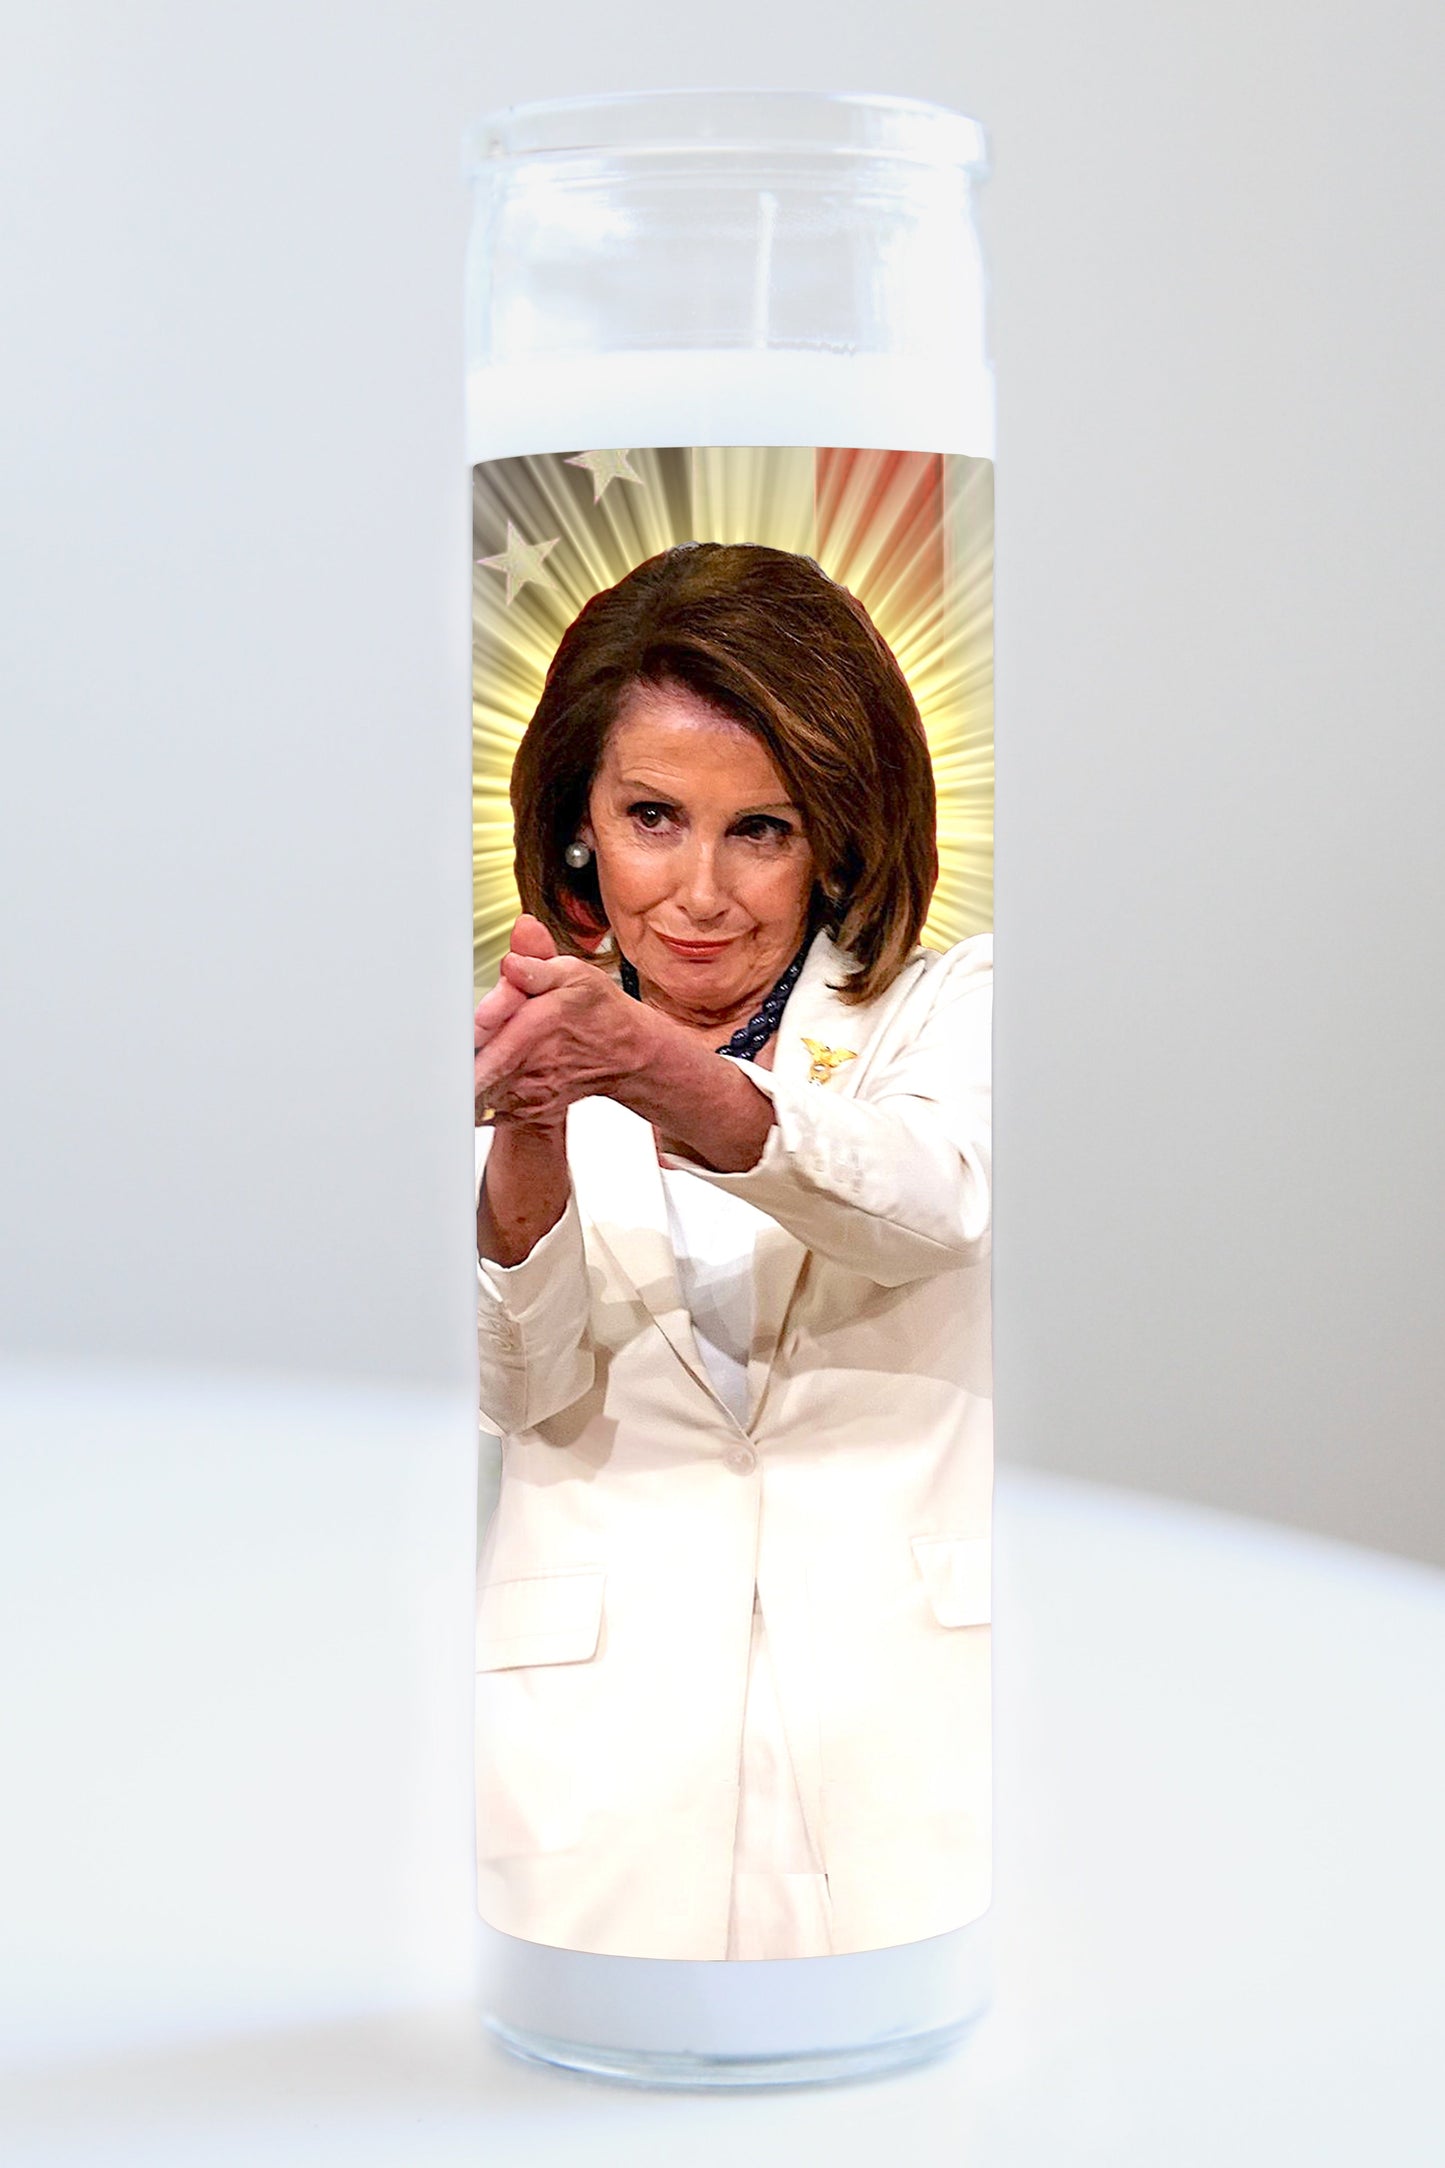 Nancy Pelosi "Clapping" Candle